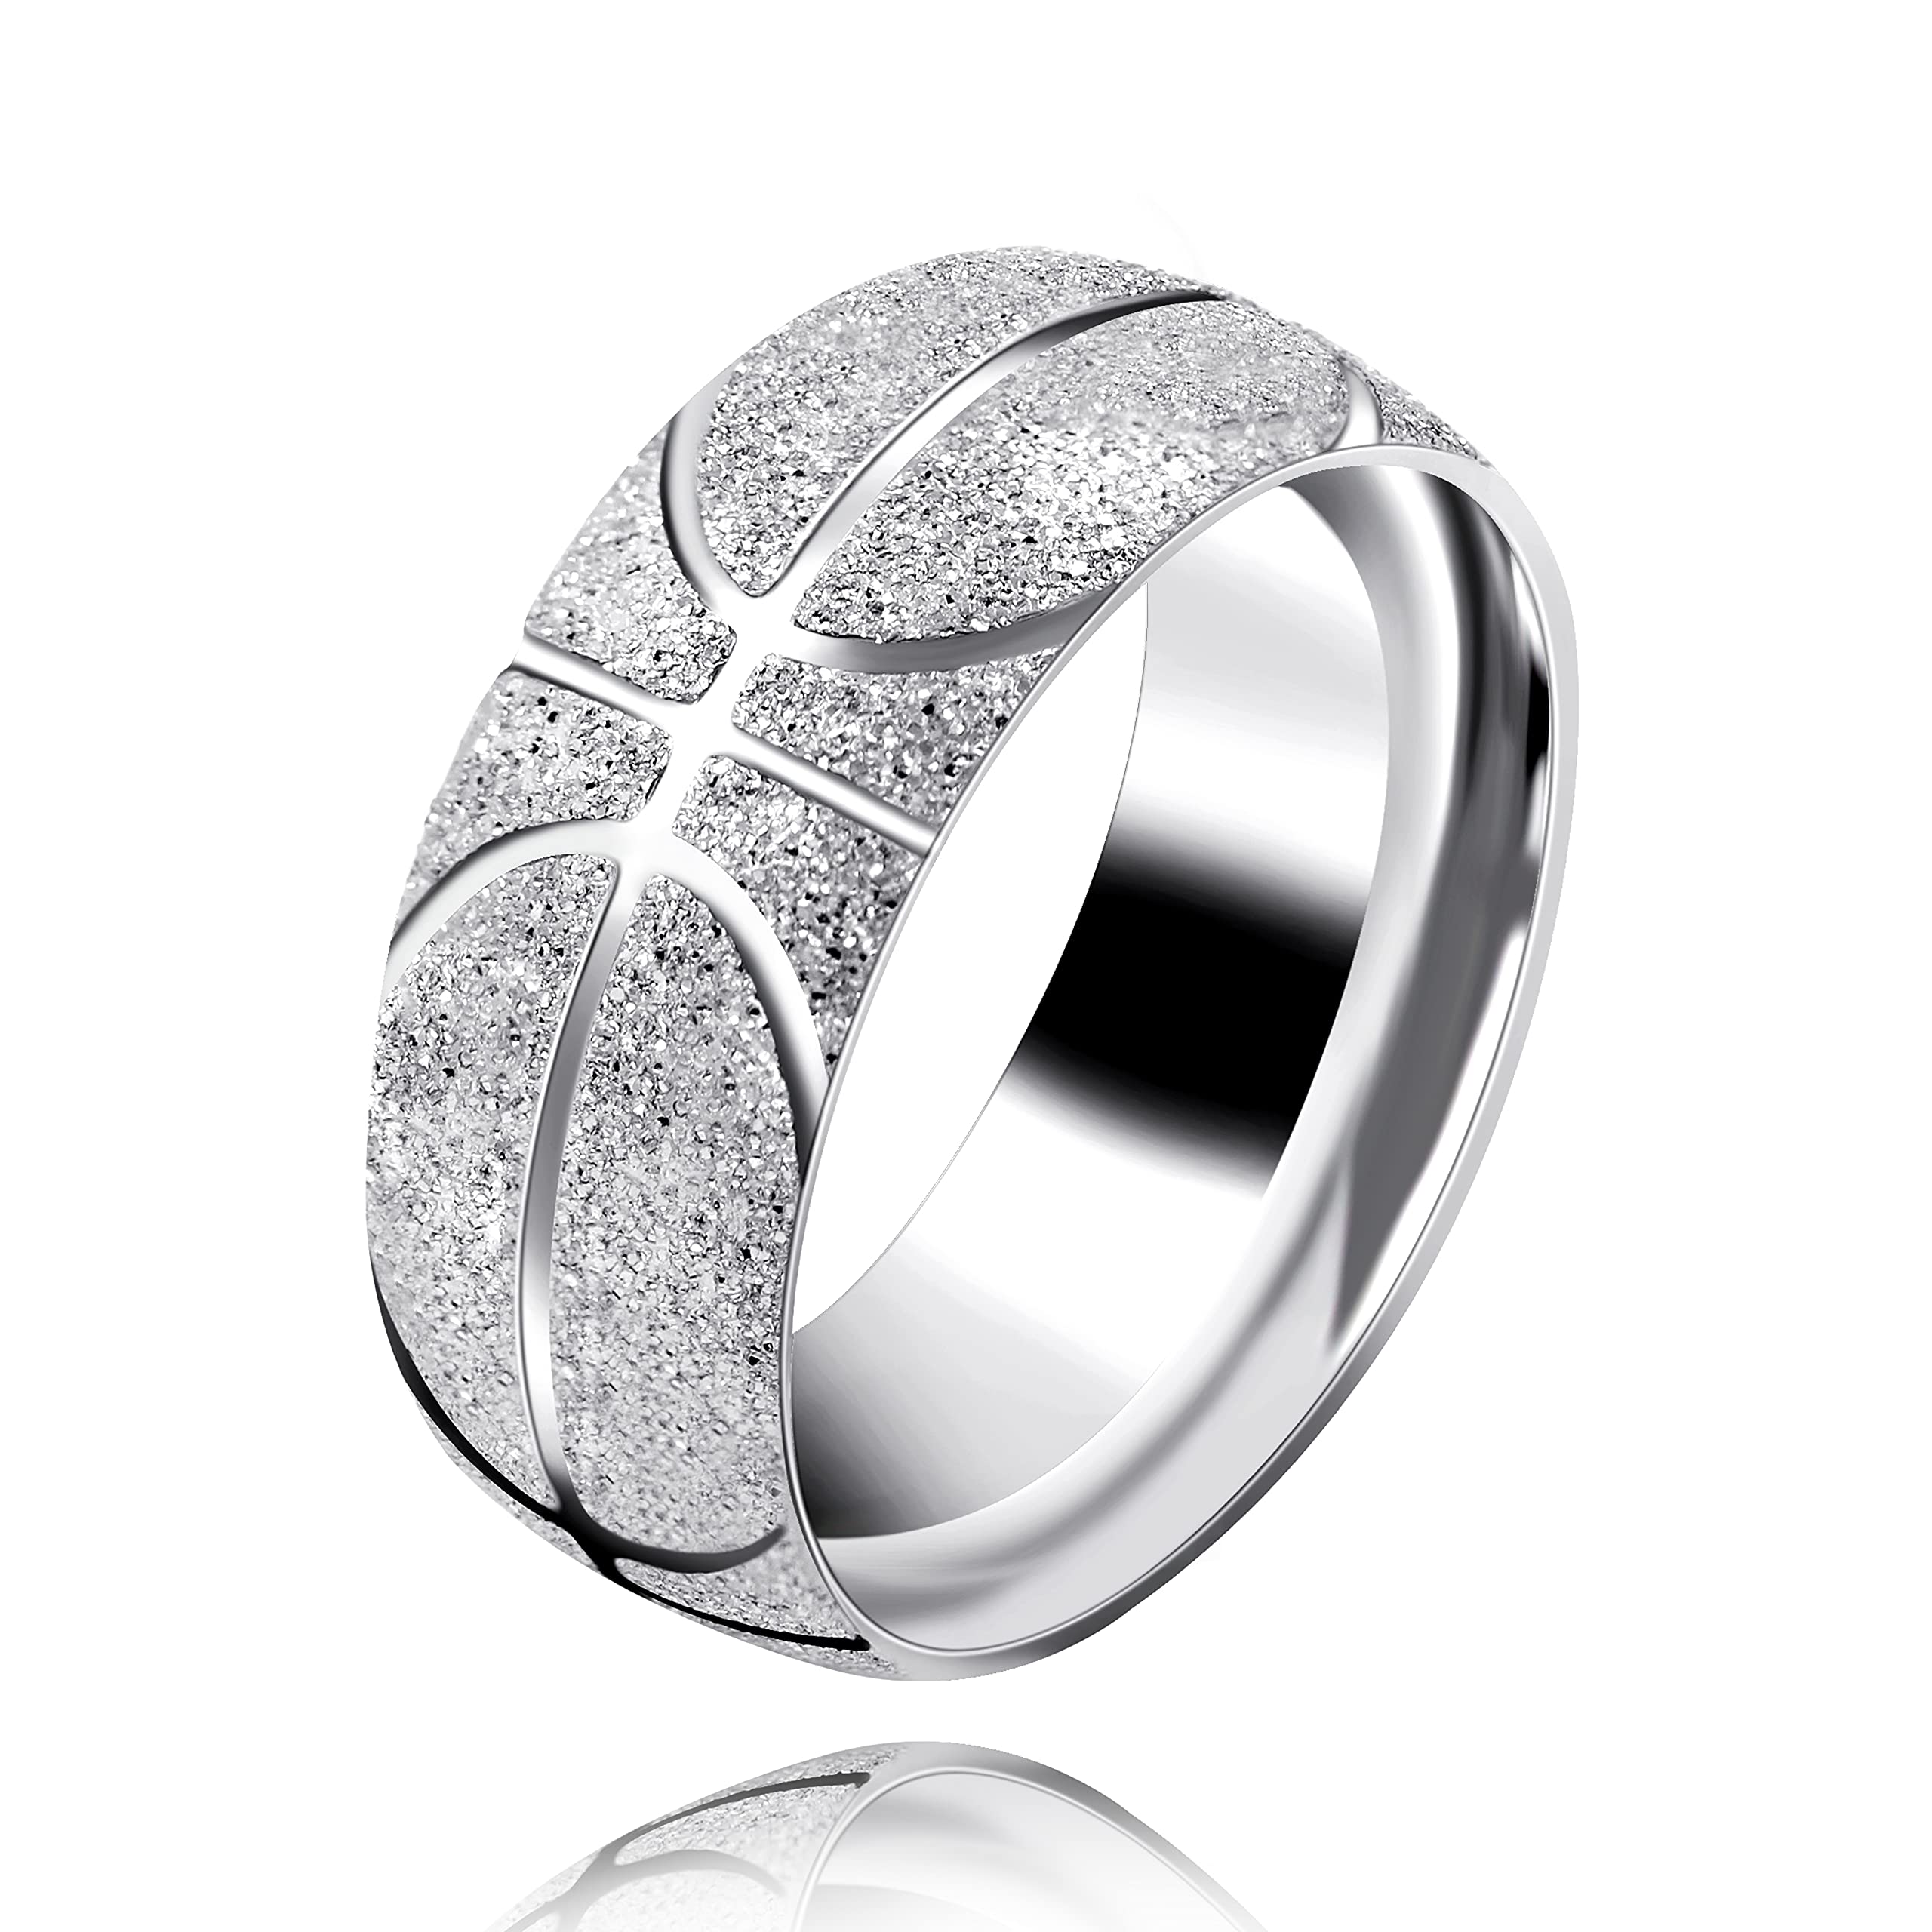 Uloveido Mens 8mm Stainless Steel Basketball Ring Comfort Fit Band Creative Sport Souvenir Gifts for Him